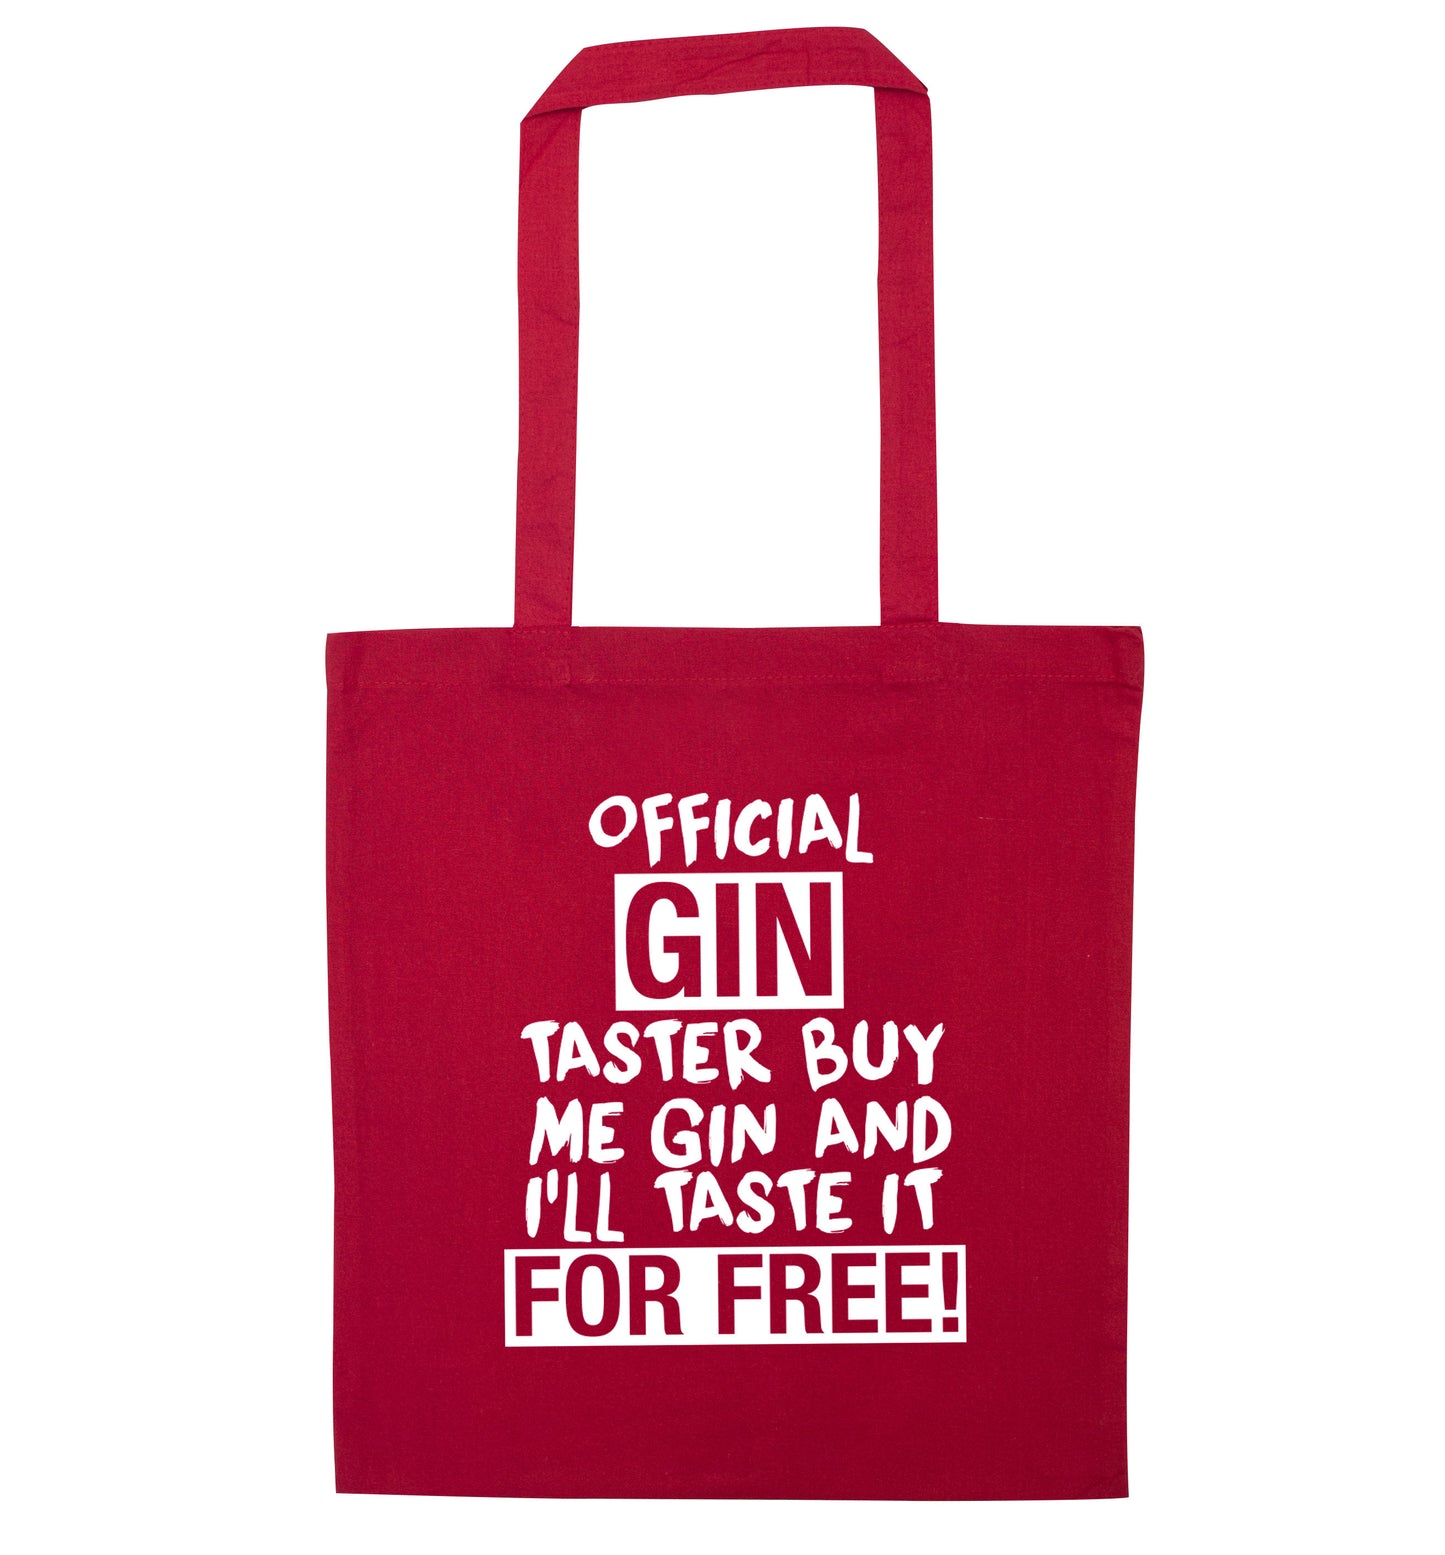 Official gin taster buy me gin and I'll taste it for free red tote bag